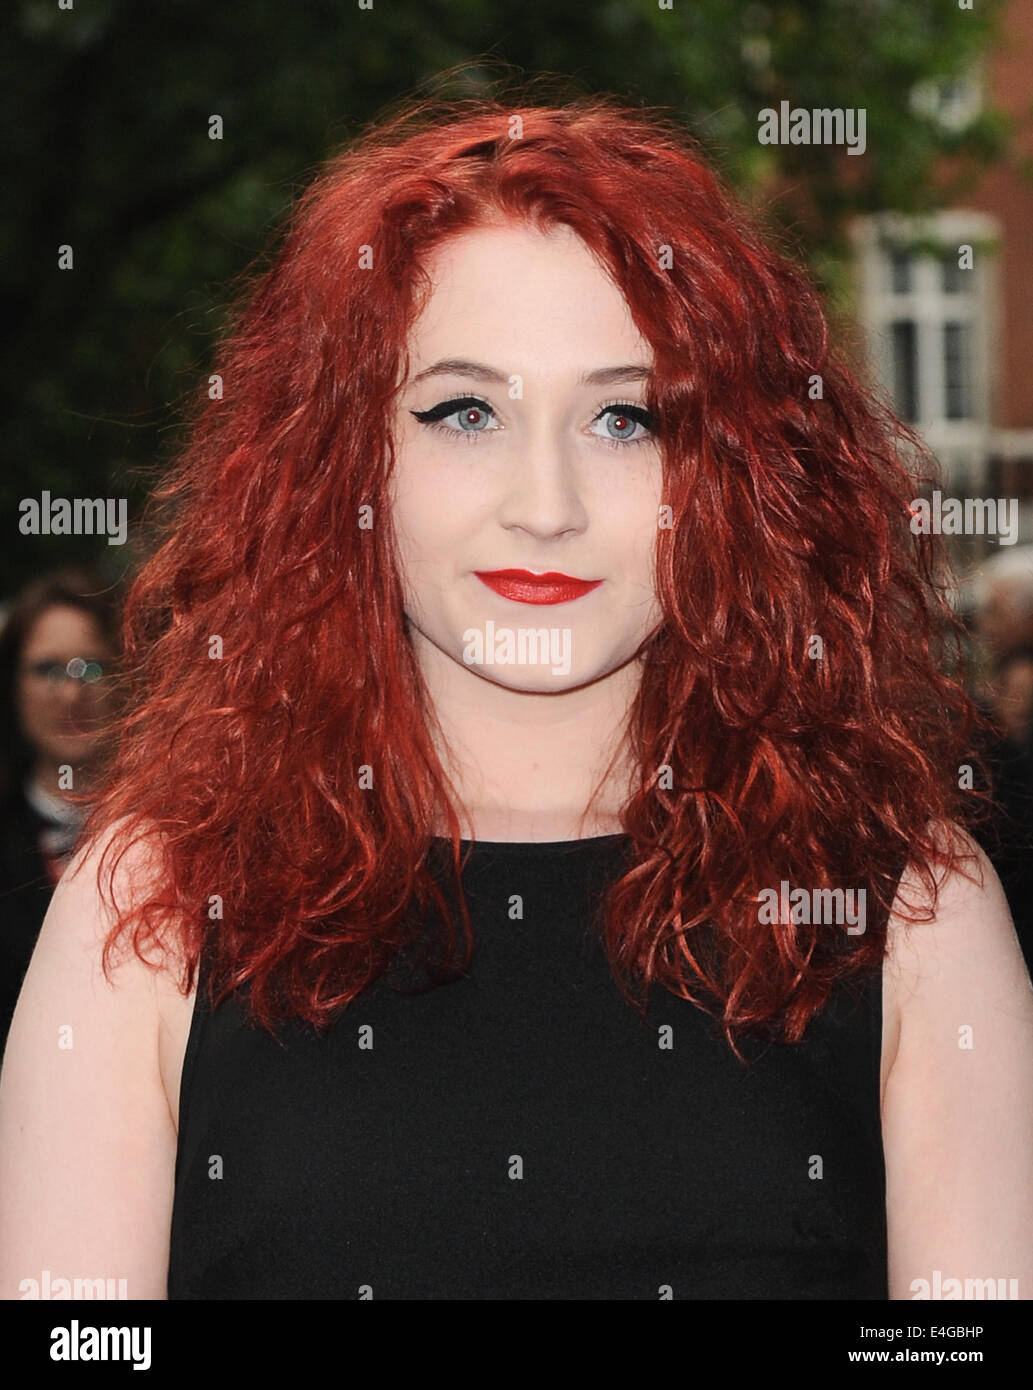 Janet devlin hi-res stock photography and images - Alamy